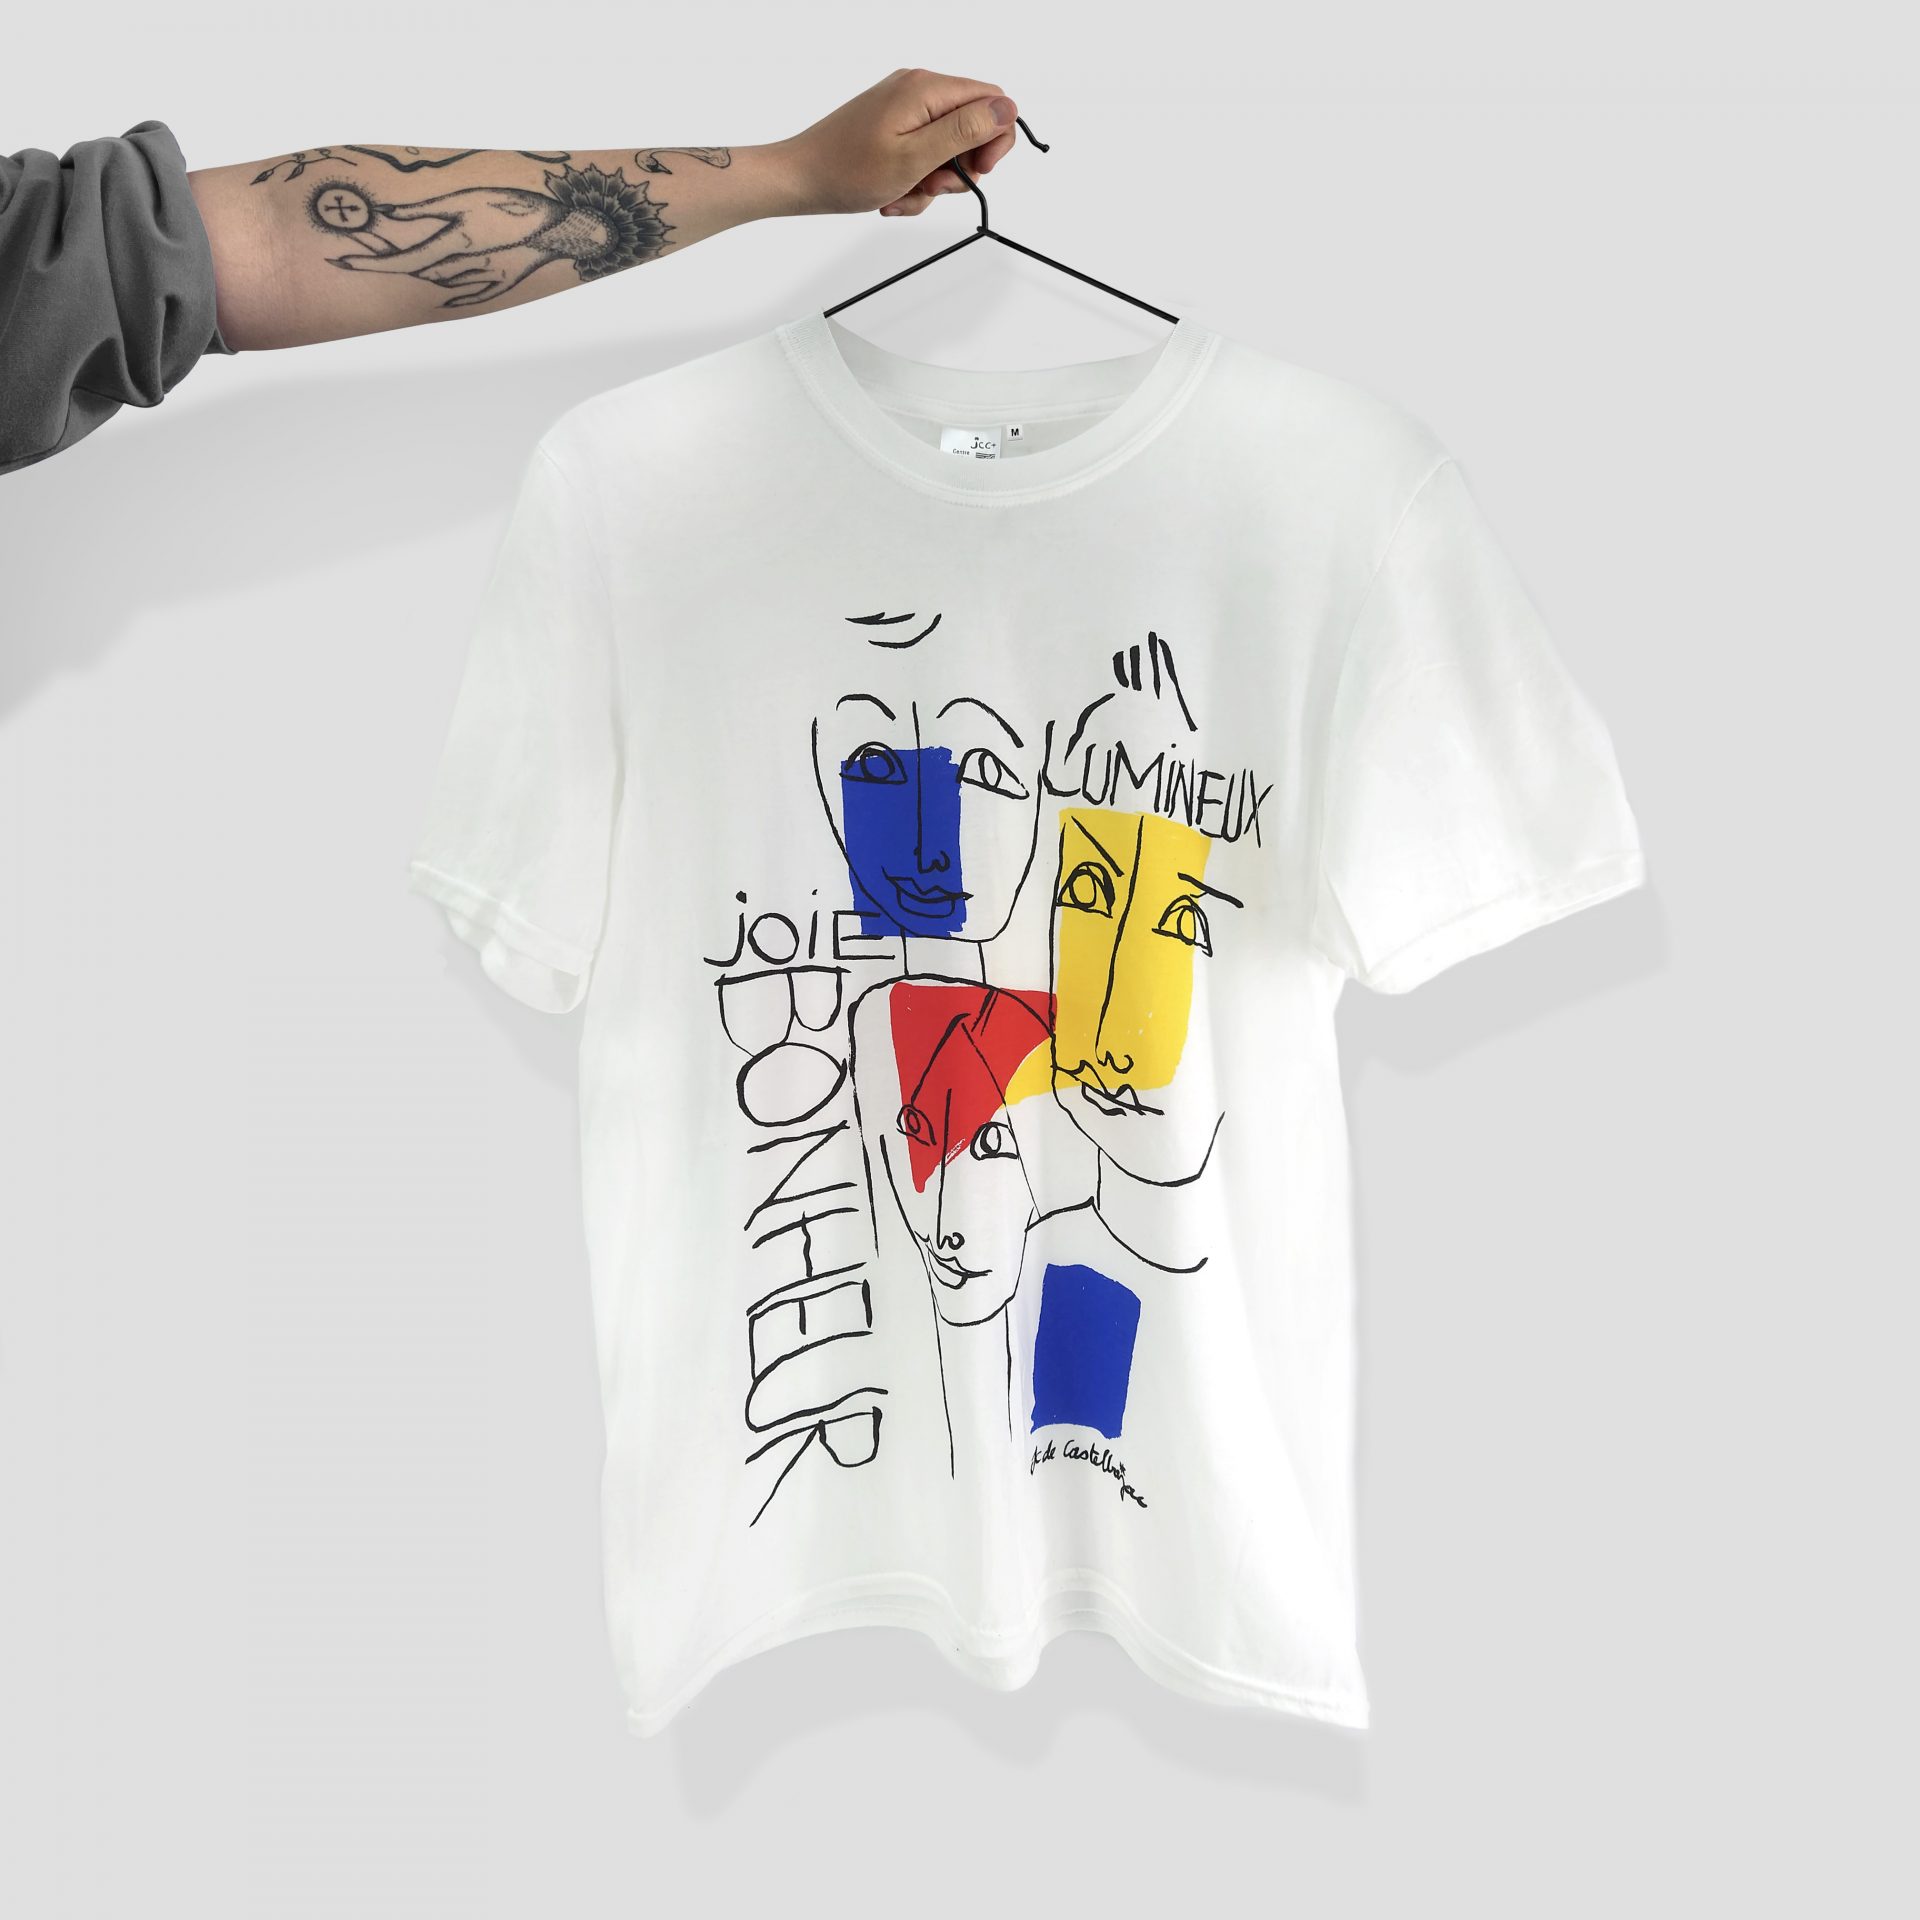 Fantastic screen printed Pompidou t-shirts, part of the new Jean-Charles de Castelbajac collection